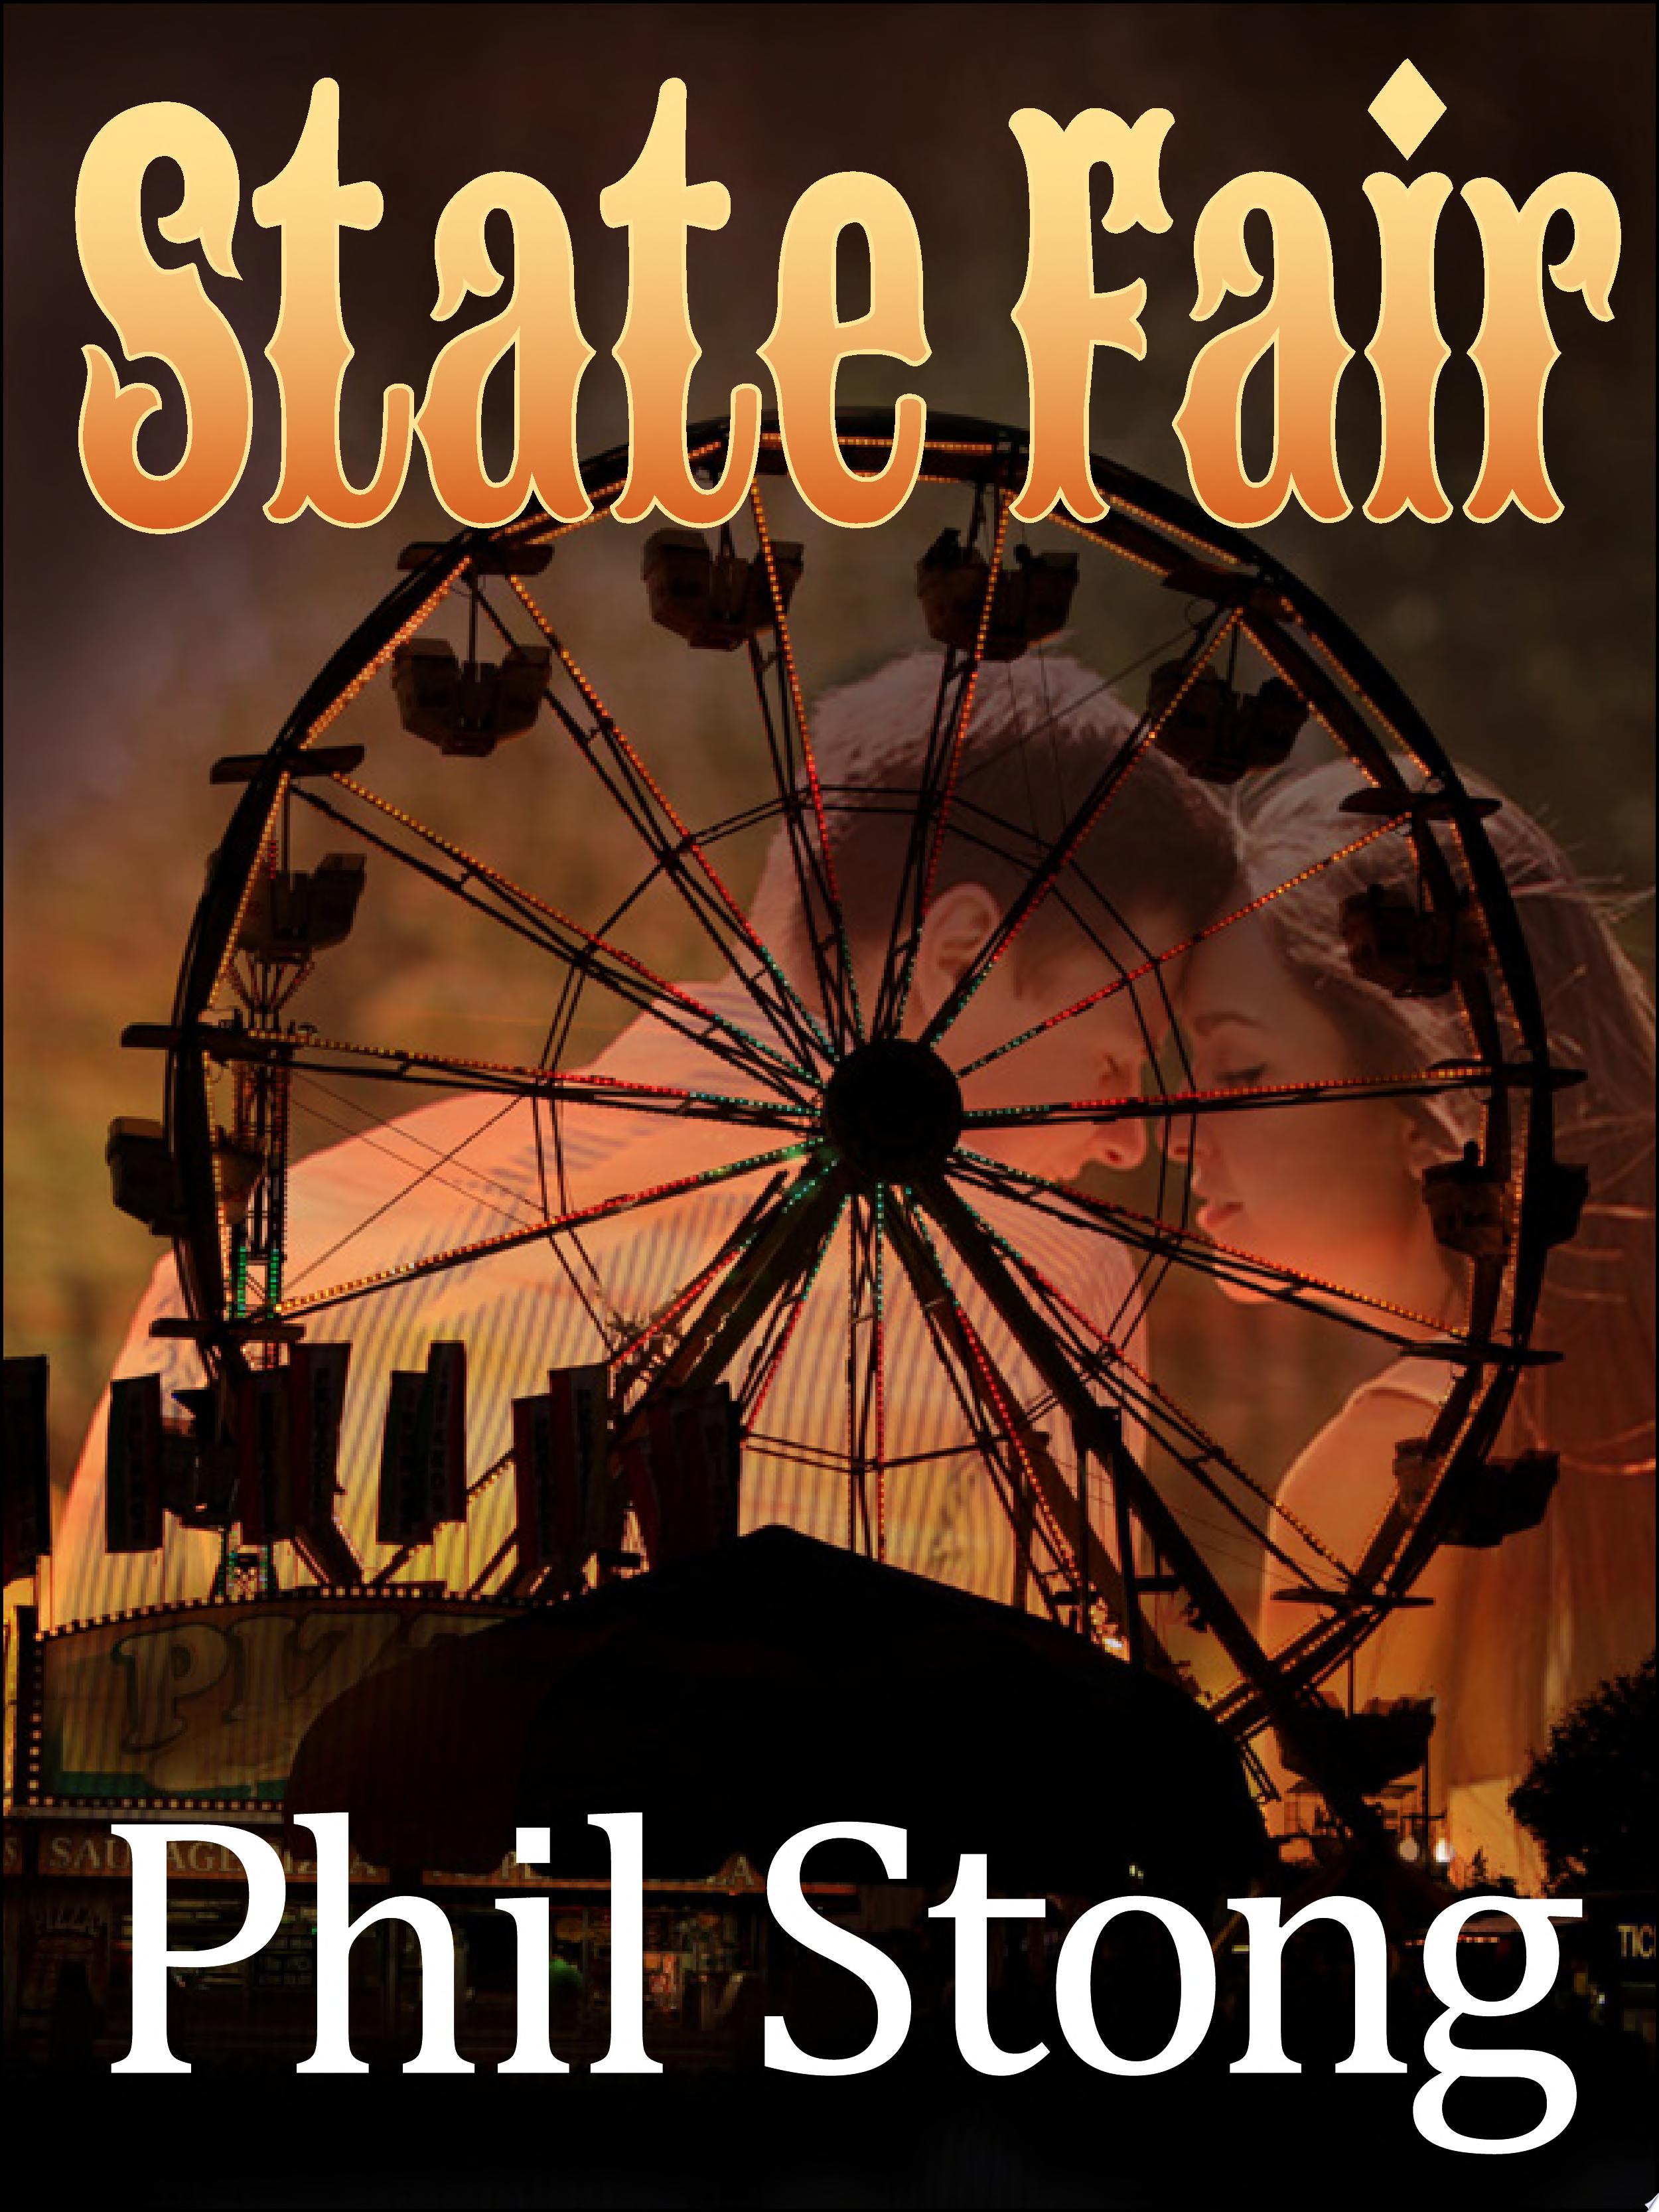 Image for "State Fair"